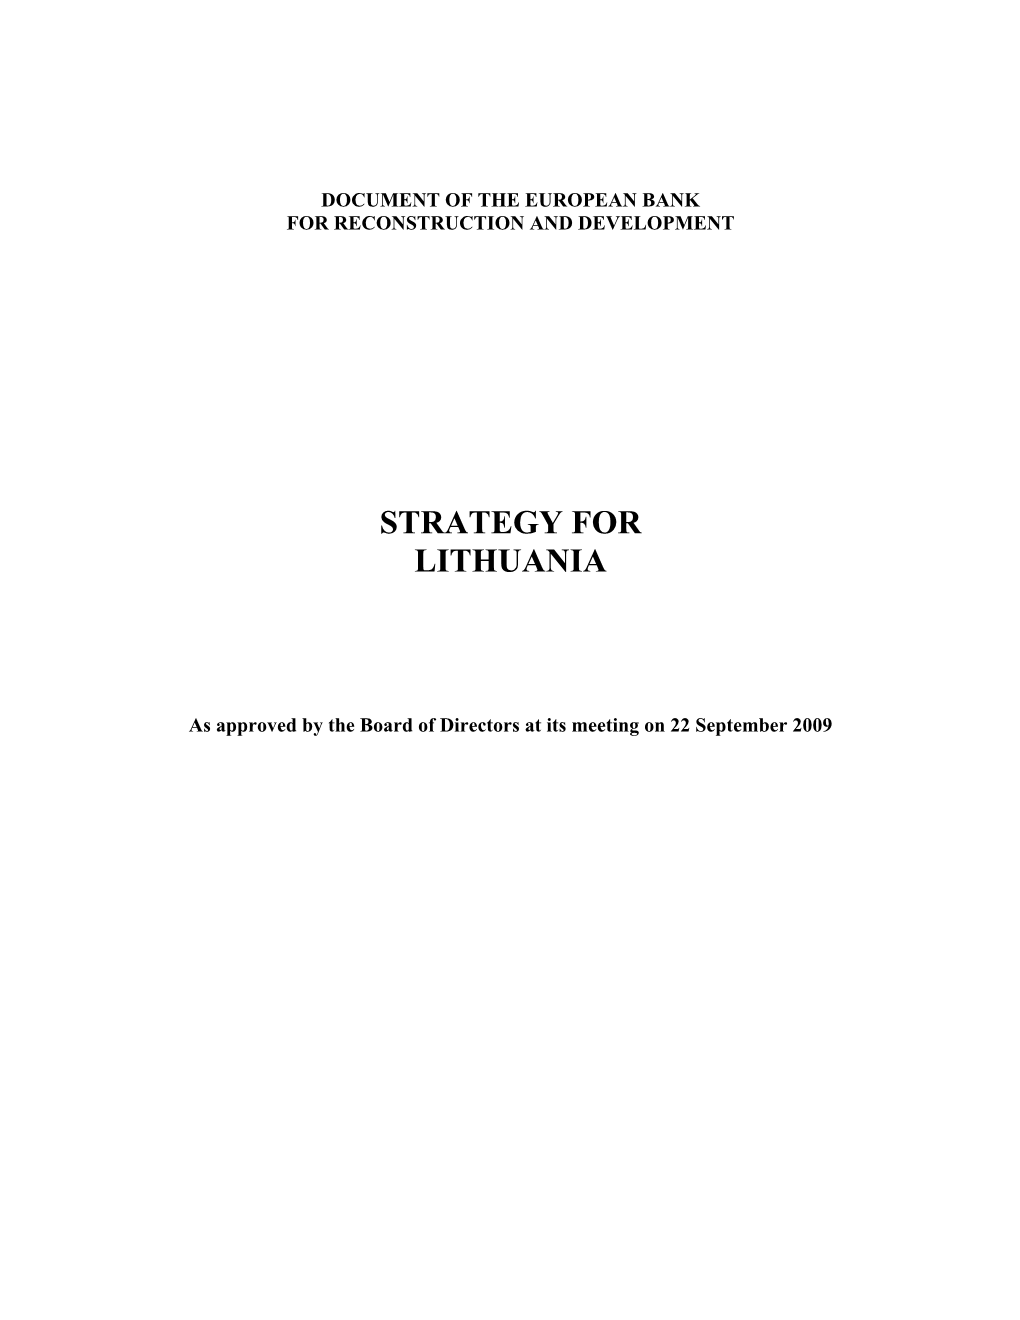 EBRD Strategy for Lithuania 2009